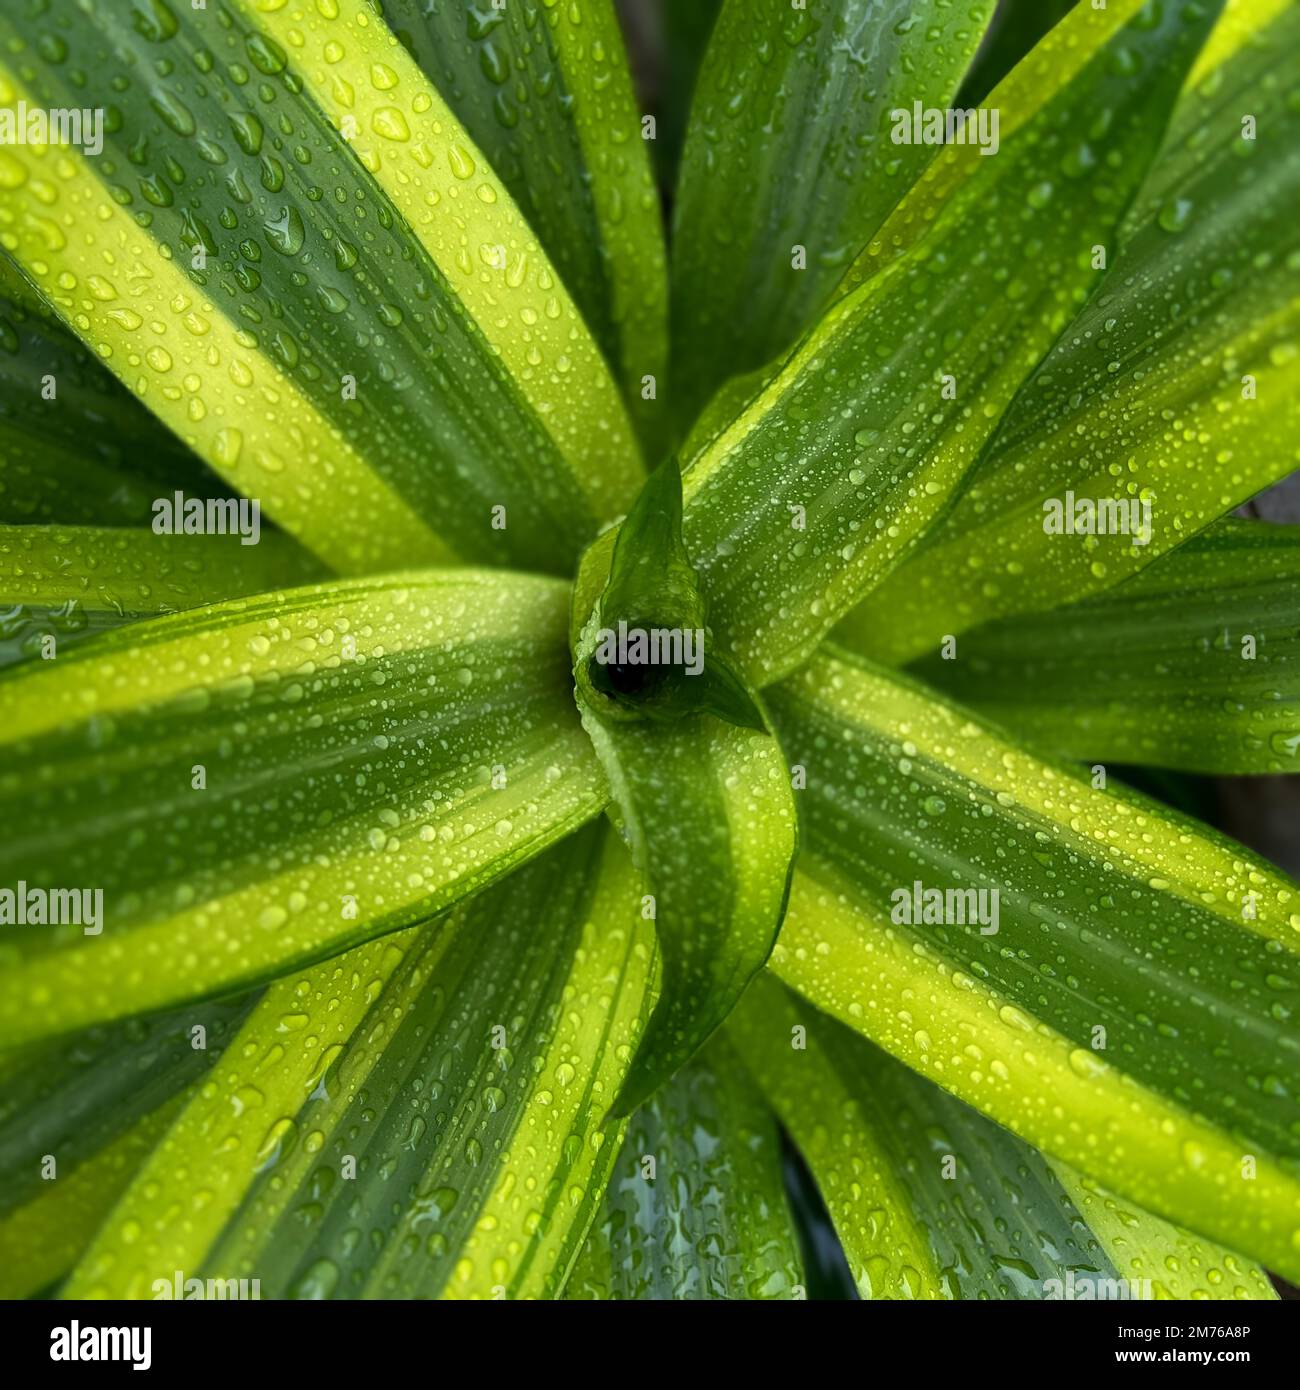 Beautiful Dracaena fragrans plant. Dracaena fragrans with fresh and water drop in leaves. close up of Dracaena fragrans plant Stock Photo